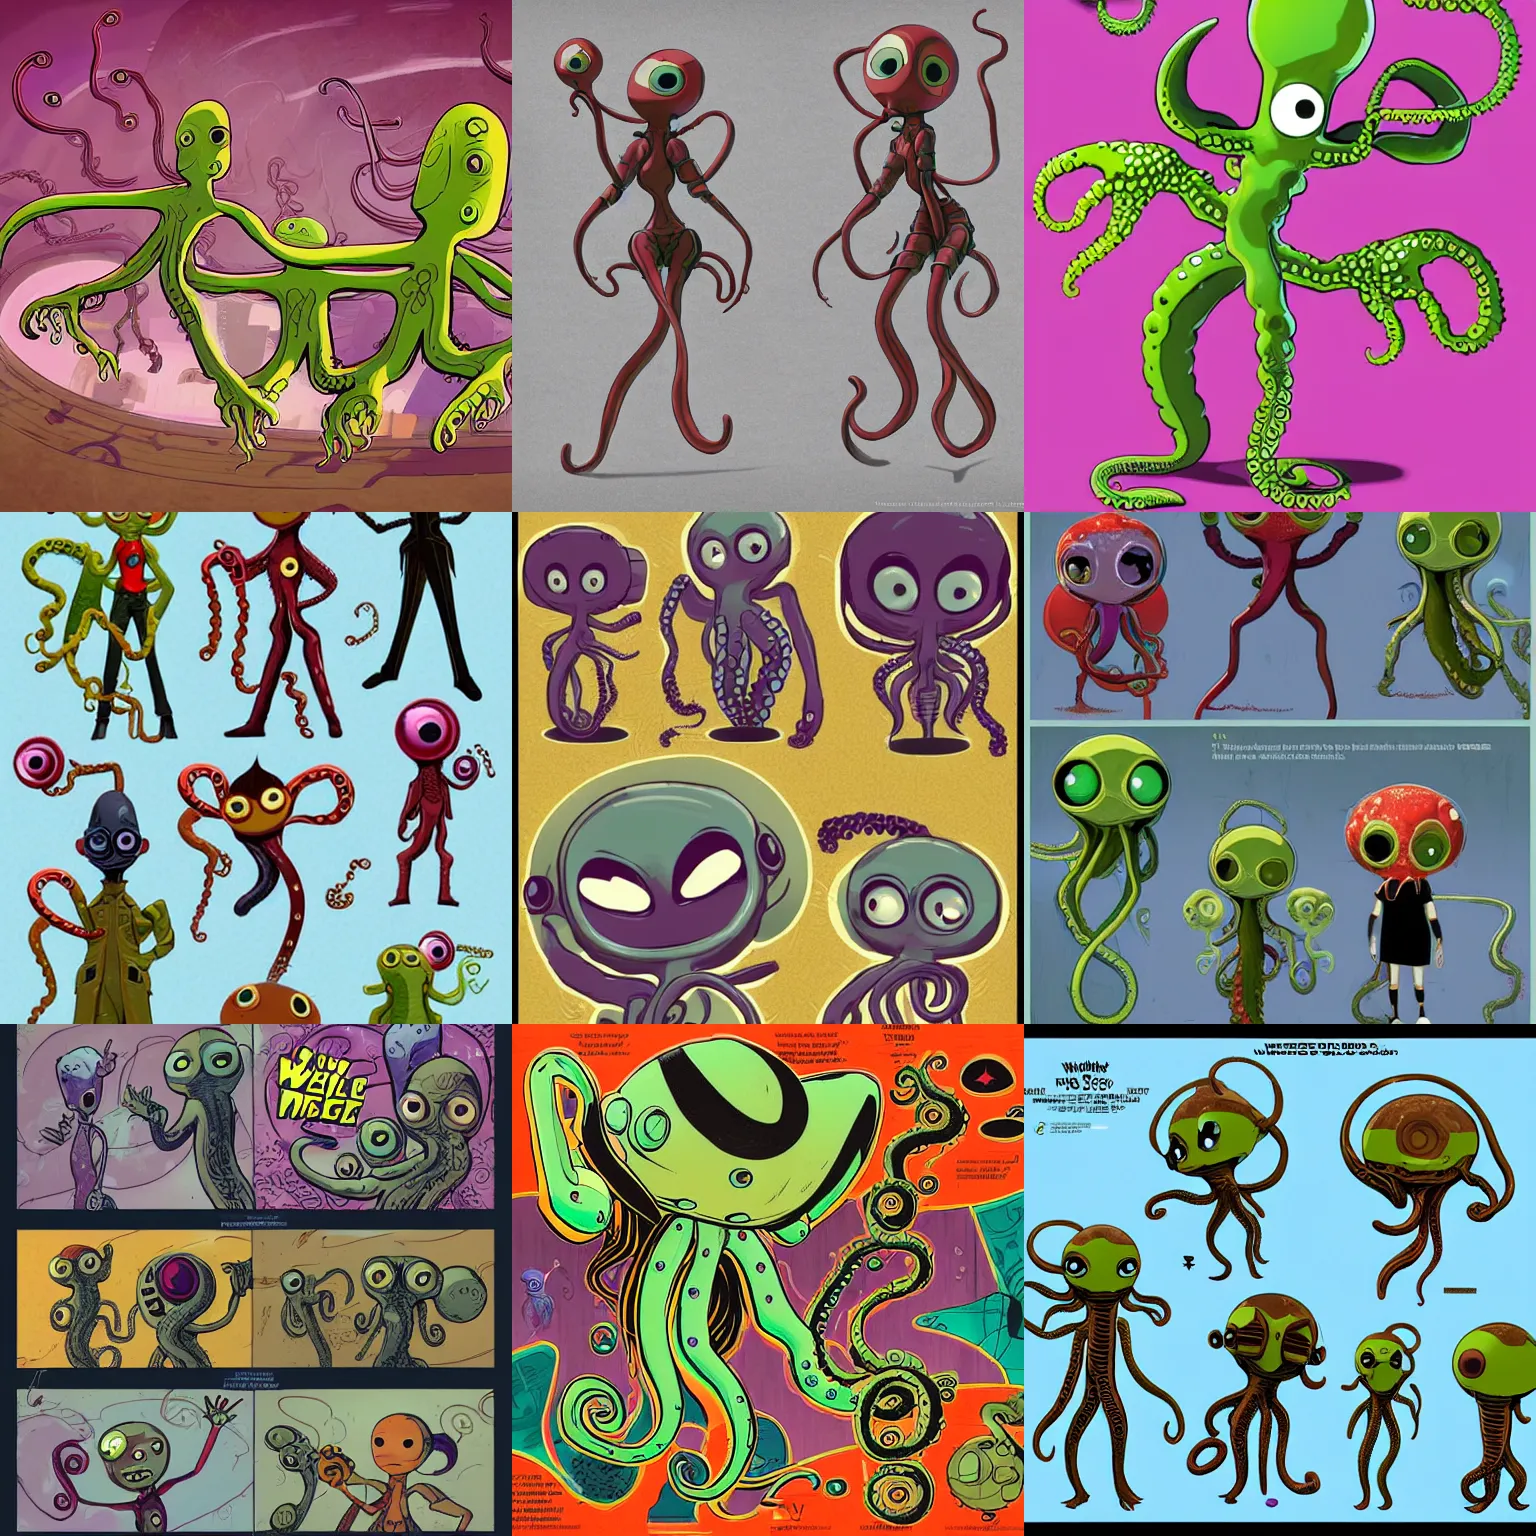 Prompt: vintage friend shaped little alien race with webbed tentacle arms as playable characters design sheets for the newest psychonauts video game made by double fine done by tim shafer that focuses on an ocean setting with help from the artist for the band gorillaz and the artists from odd world inhabitant inc and Lauren faust from her work on dc superhero girls and lead artist Andy Suriano from rise of the teenage mutant ninja turtles on nickelodeon using artistic cues for the game fret nice